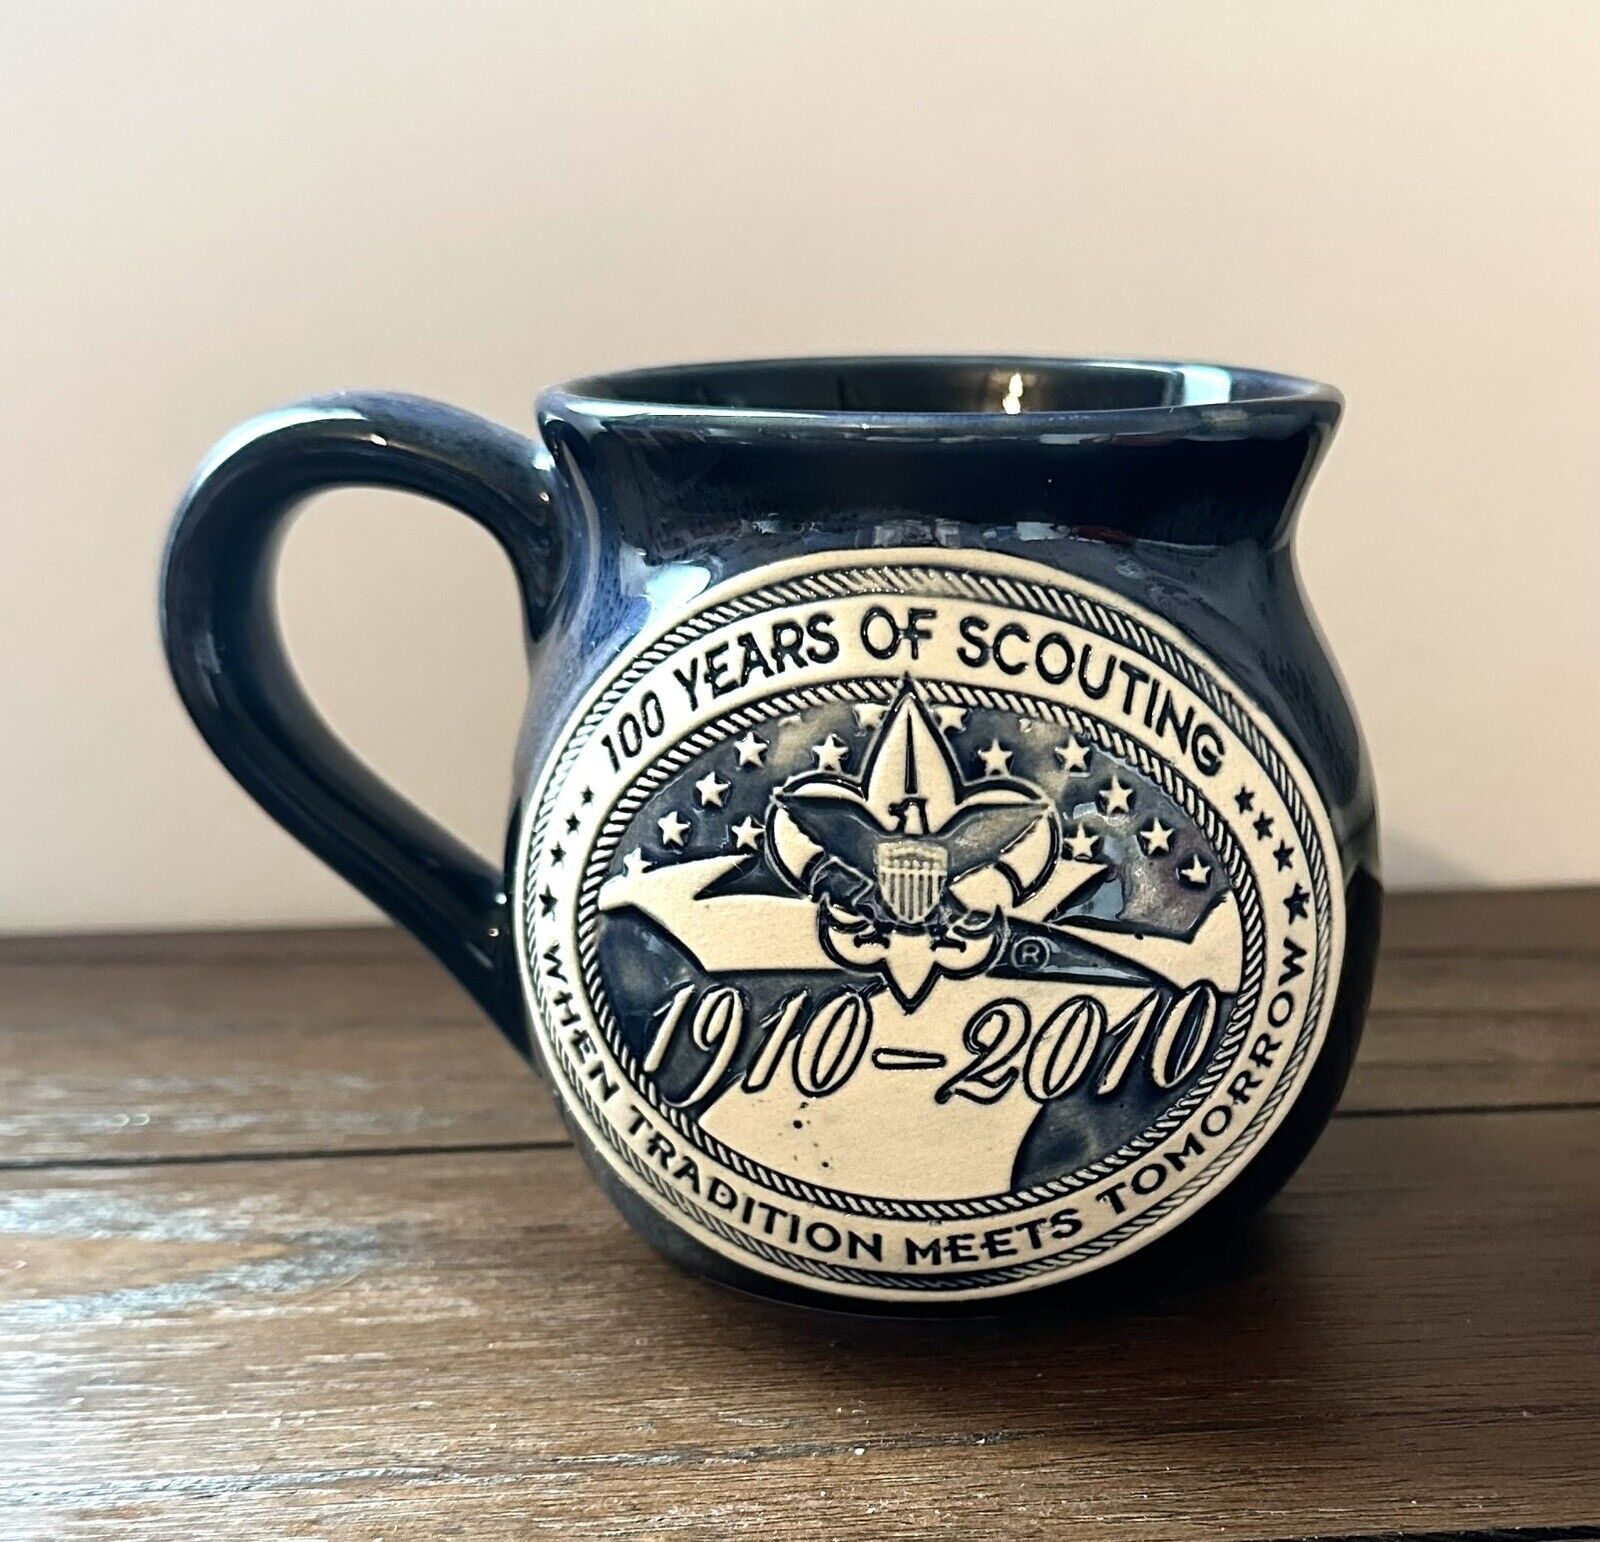 2010 BOY SCOUTS OF AMERICA - 100 Years of Scouting - Navy Blue Pottery MUG